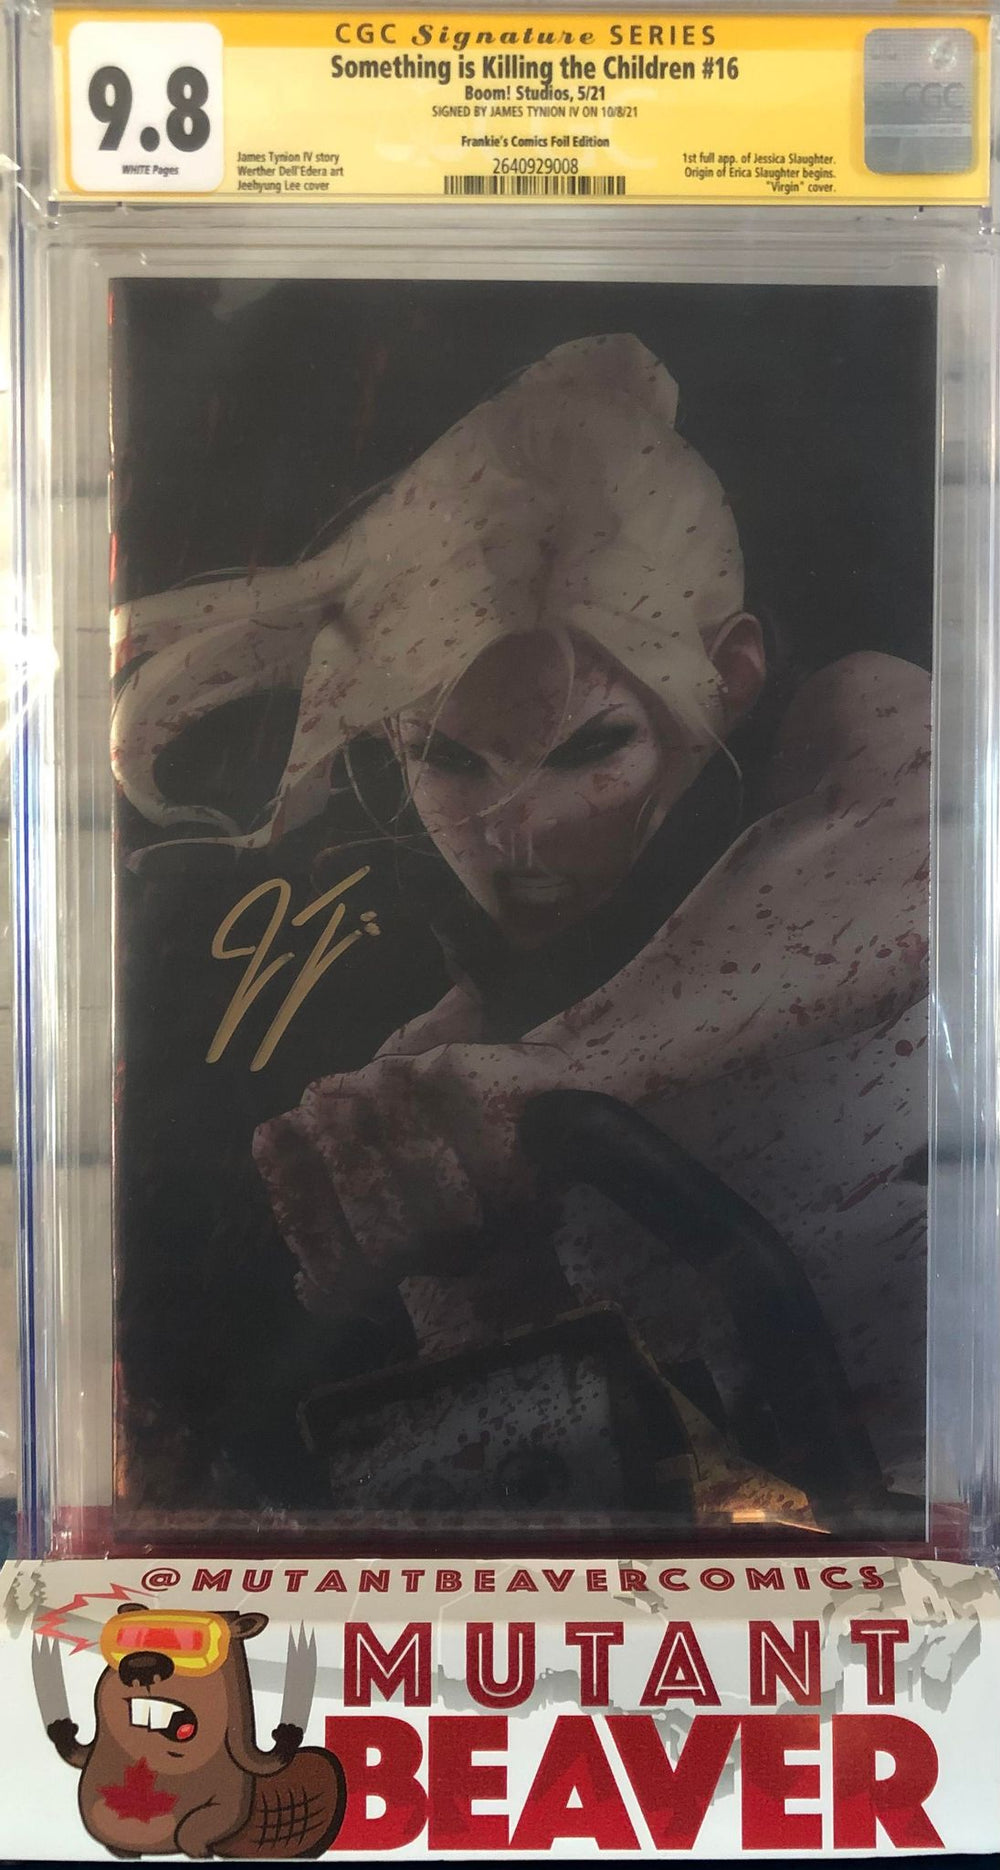 CGC 9.8 SS SOMETHING IS KILLING THE CHILDREN #16 JeeHyung Lee FOIL VIRGIN EXCLUSIVE (SIGNED BY Tynion)